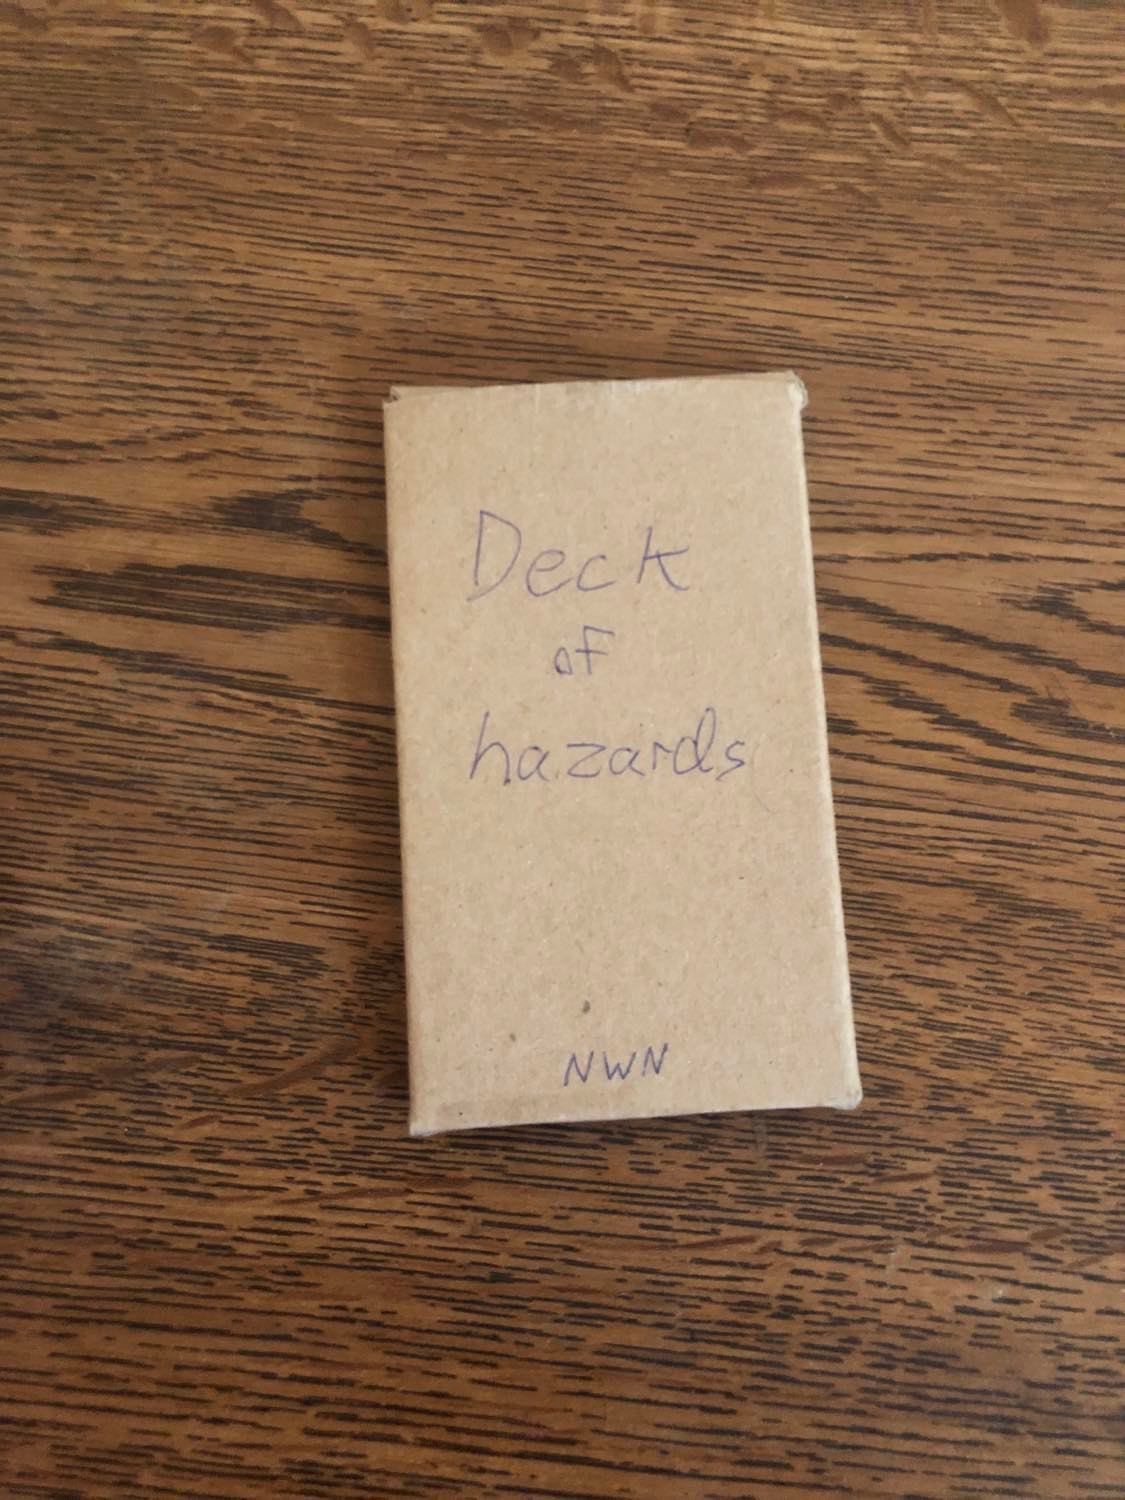 The Deck of hazards box, raw cardboard with the name written on the front, laying on a wooden table.